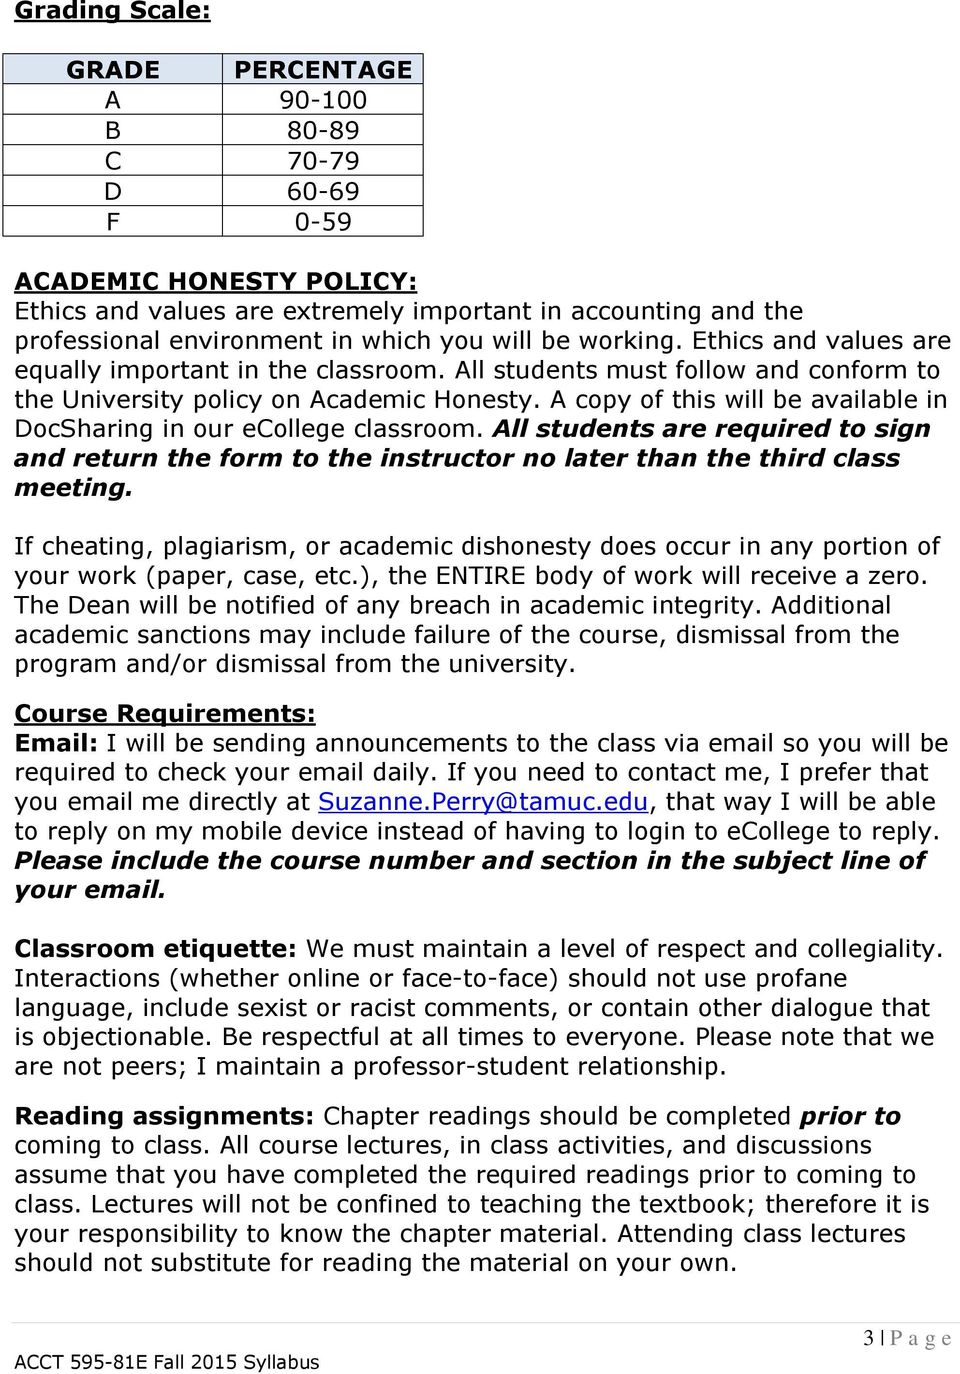 A copy of this will be available in DocSharing in our ecollege classroom. All students are required to sign and return the form to the instructor no later than the third class meeting.